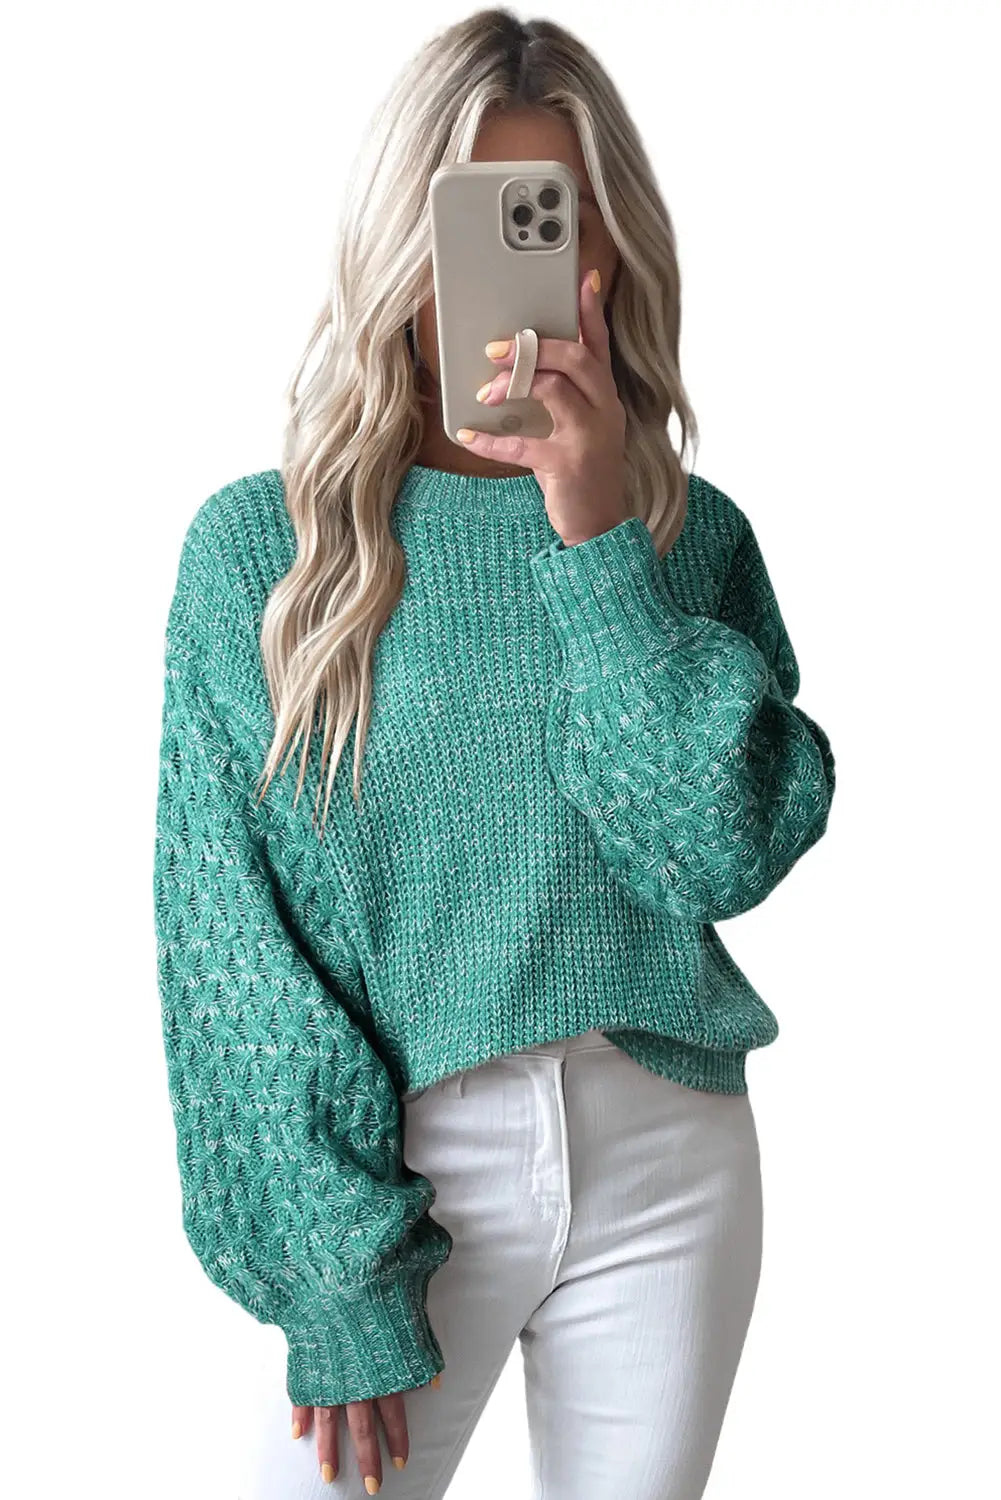 Sea green cable knit sleeve drop shoulder sweater - sweaters & cardigans